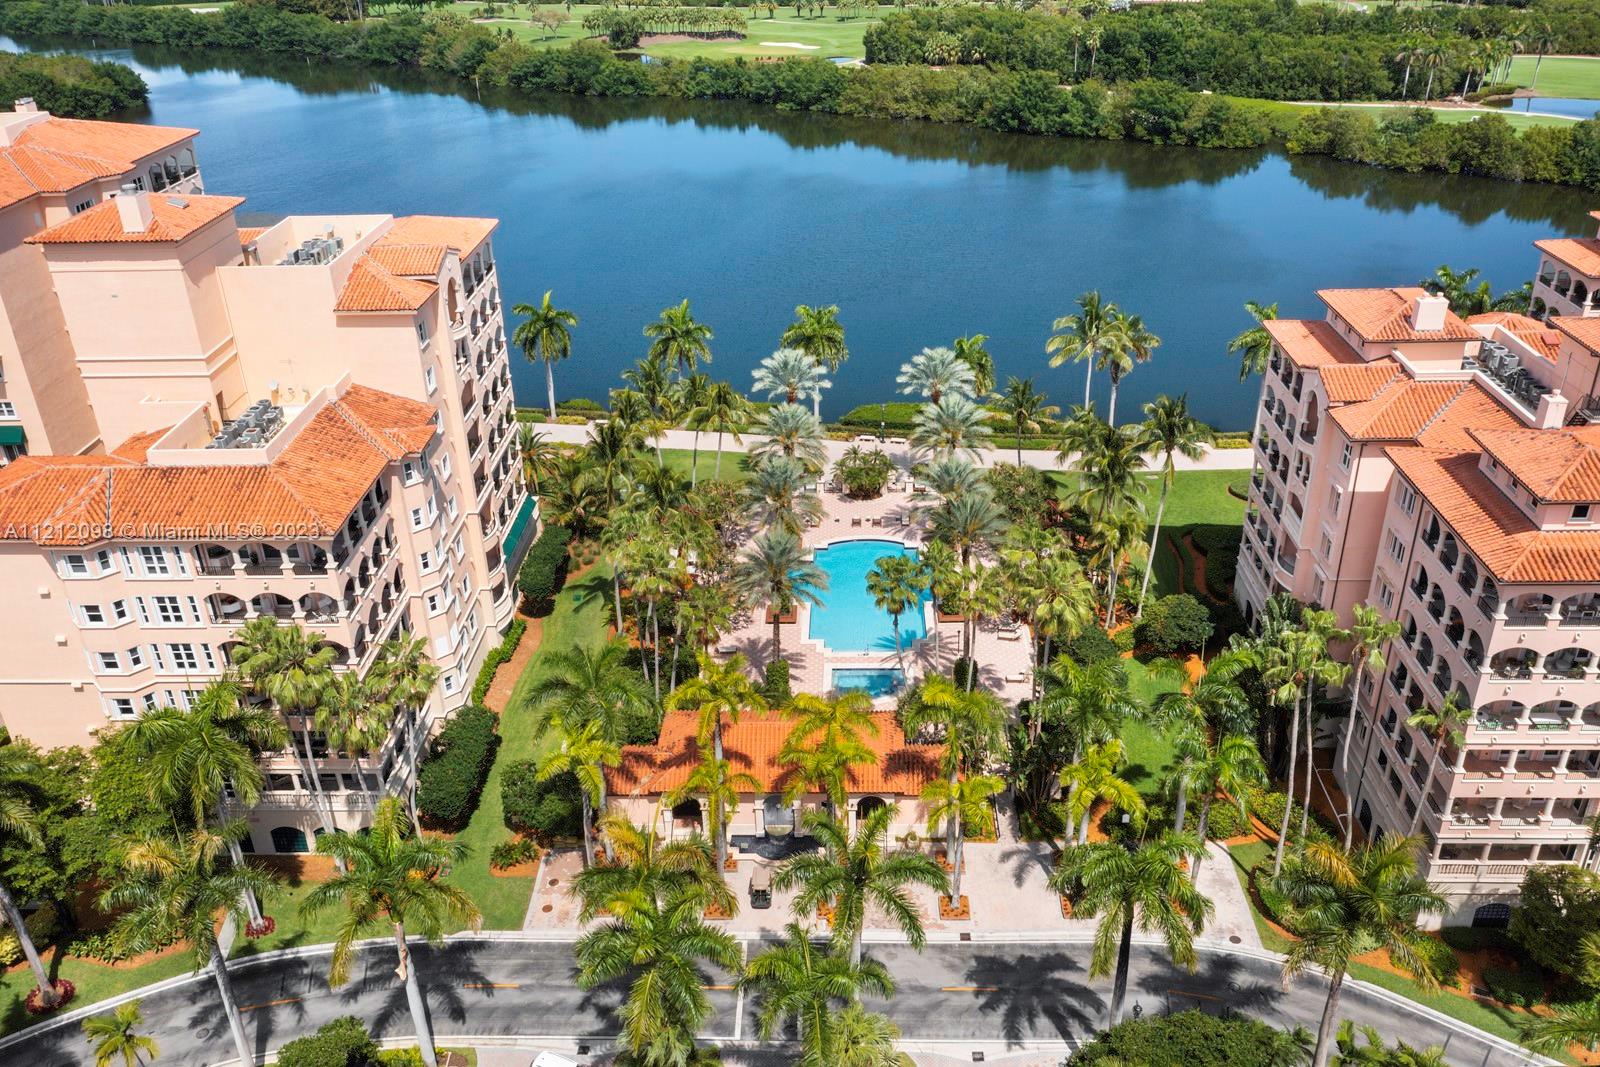 Paradise awaits in this beautiful condo in Deering Bay Yacht & Country Club's Padua building. This 2-bd, 2.5-ba condo features open views of the gorgeous community from the wide balcony, a large living/dining room, eat-in kitchen w/ adjacent family room + a bonus office/den that opens to the primary bedroom. Lovingly maintained, this unit has both marble floors + wood floors throughout. There is no shortage of storage space w/ generous walk-in closets in both bedrooms, 2 pantry closets + a laundry/utility room. Also included a large, air-conditioned storage space, 2 dedicated parking spaces, plus an added space for a golf cart. Deering Bay offers an amazing quality of life w/ its Clubhouse, resort-style pools, golf course, 3 marinas, tennis courts + more (Club membership is separate).